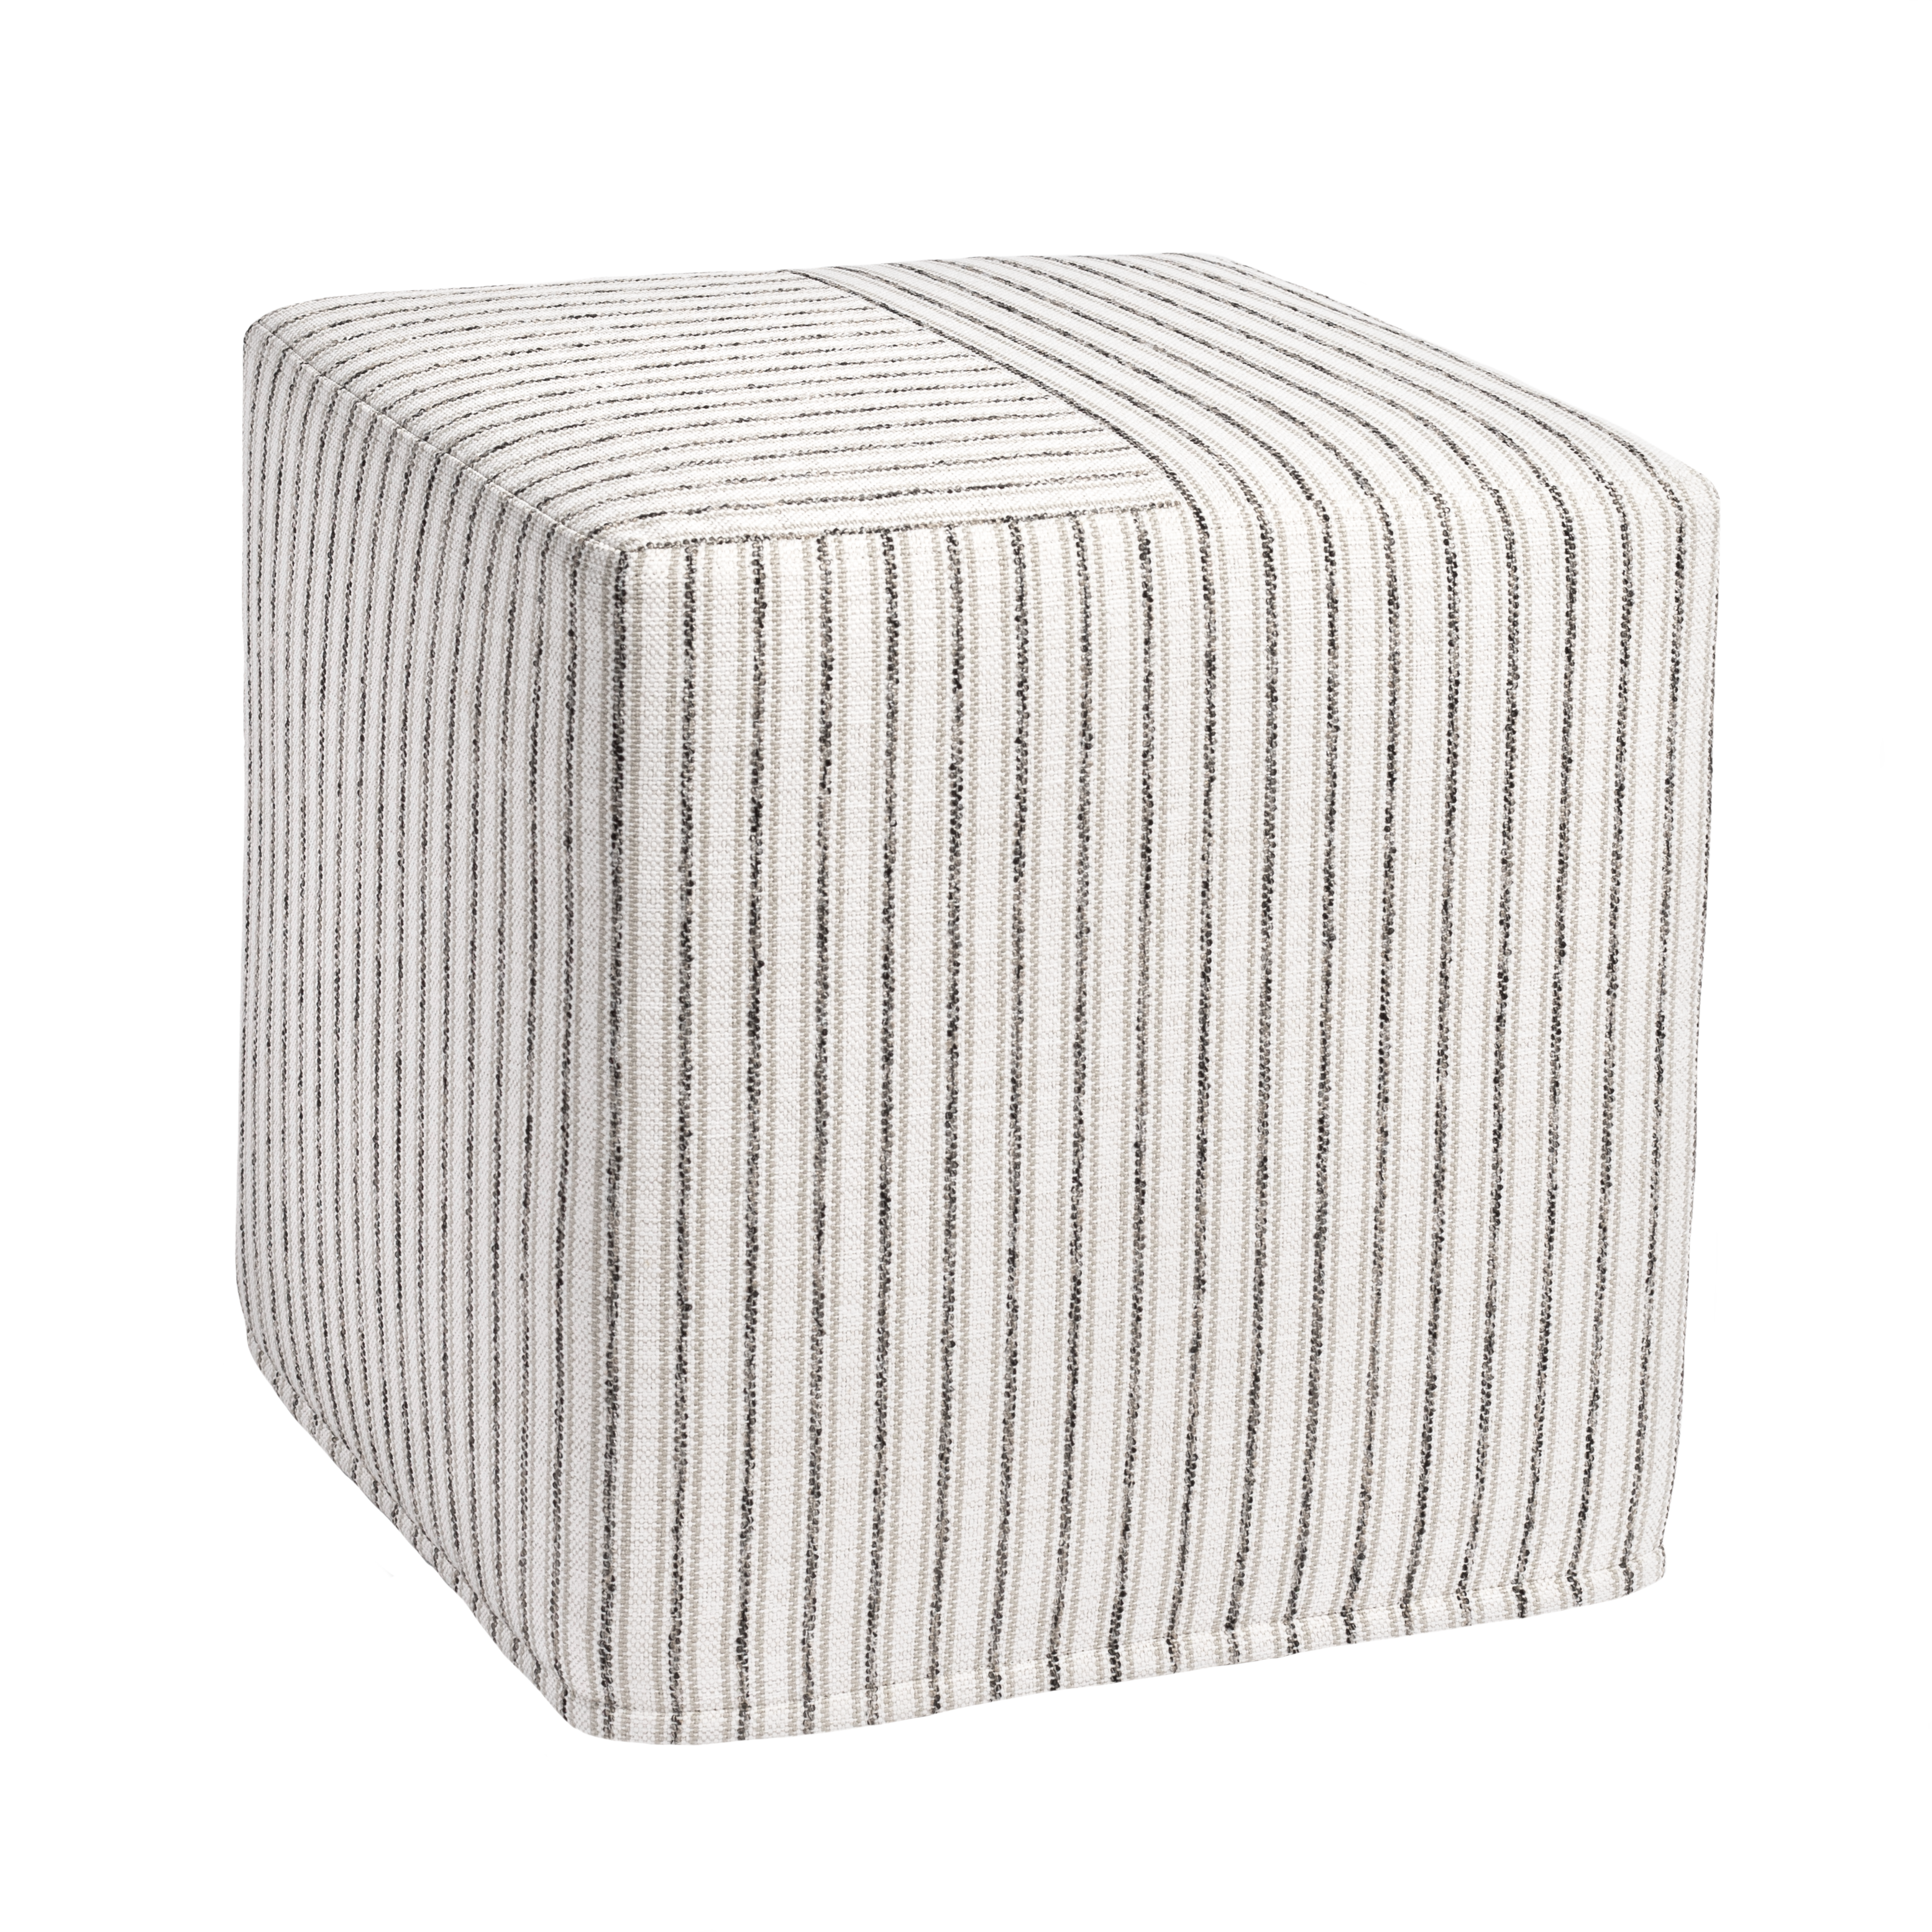 Rodin Stripe Cube Ottoman, Natural from Tonic Living